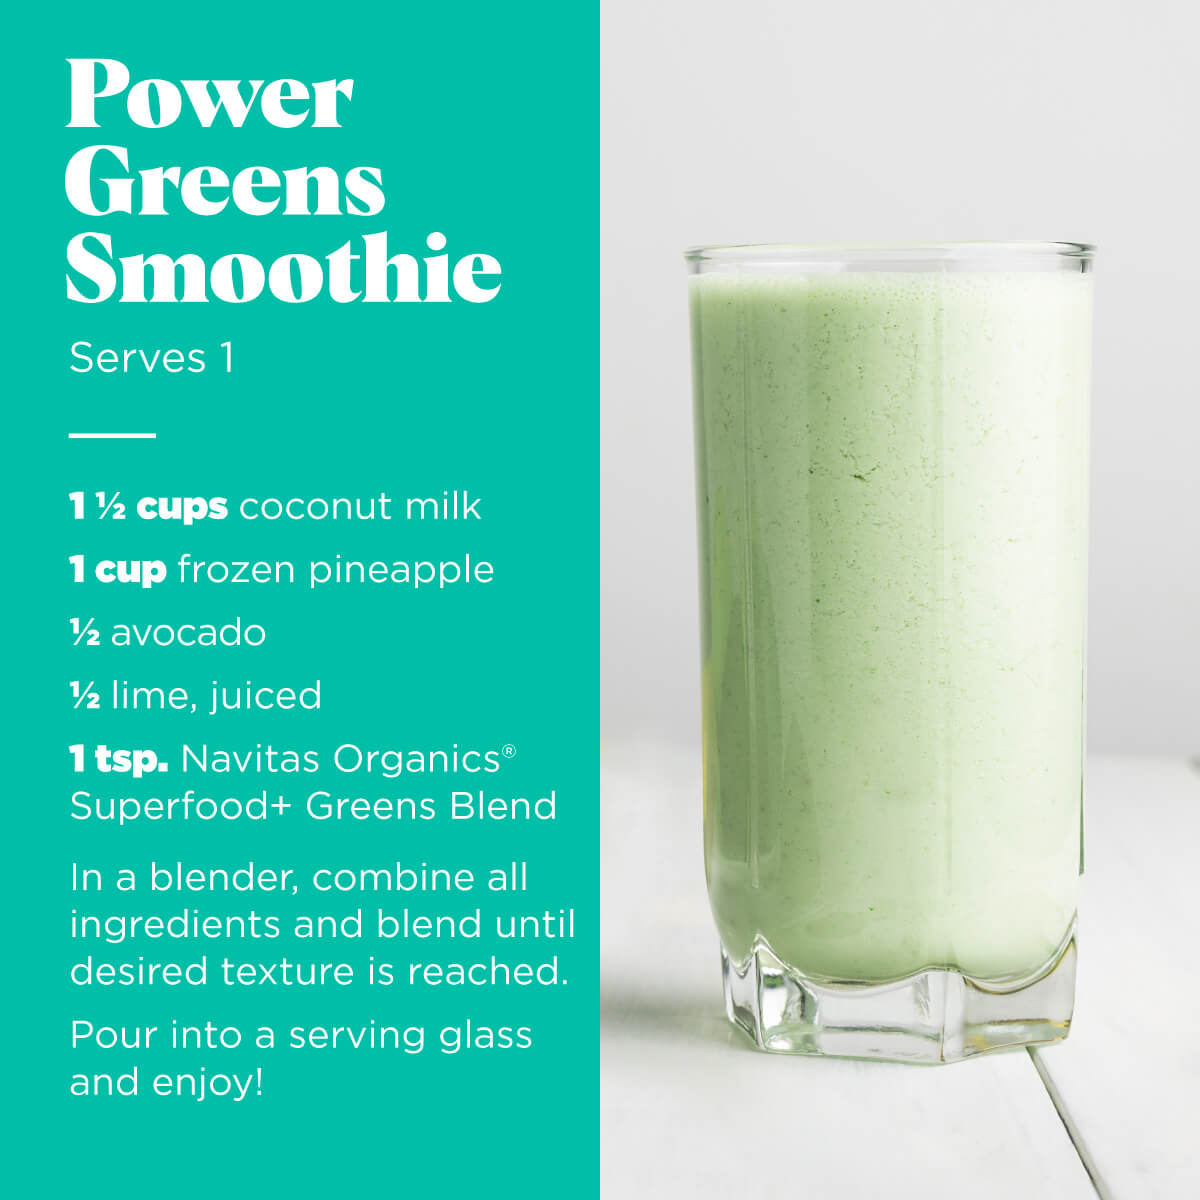 Power Greens Smoothie Recipe made with Navitas Organics Superfood+ Greens Blend